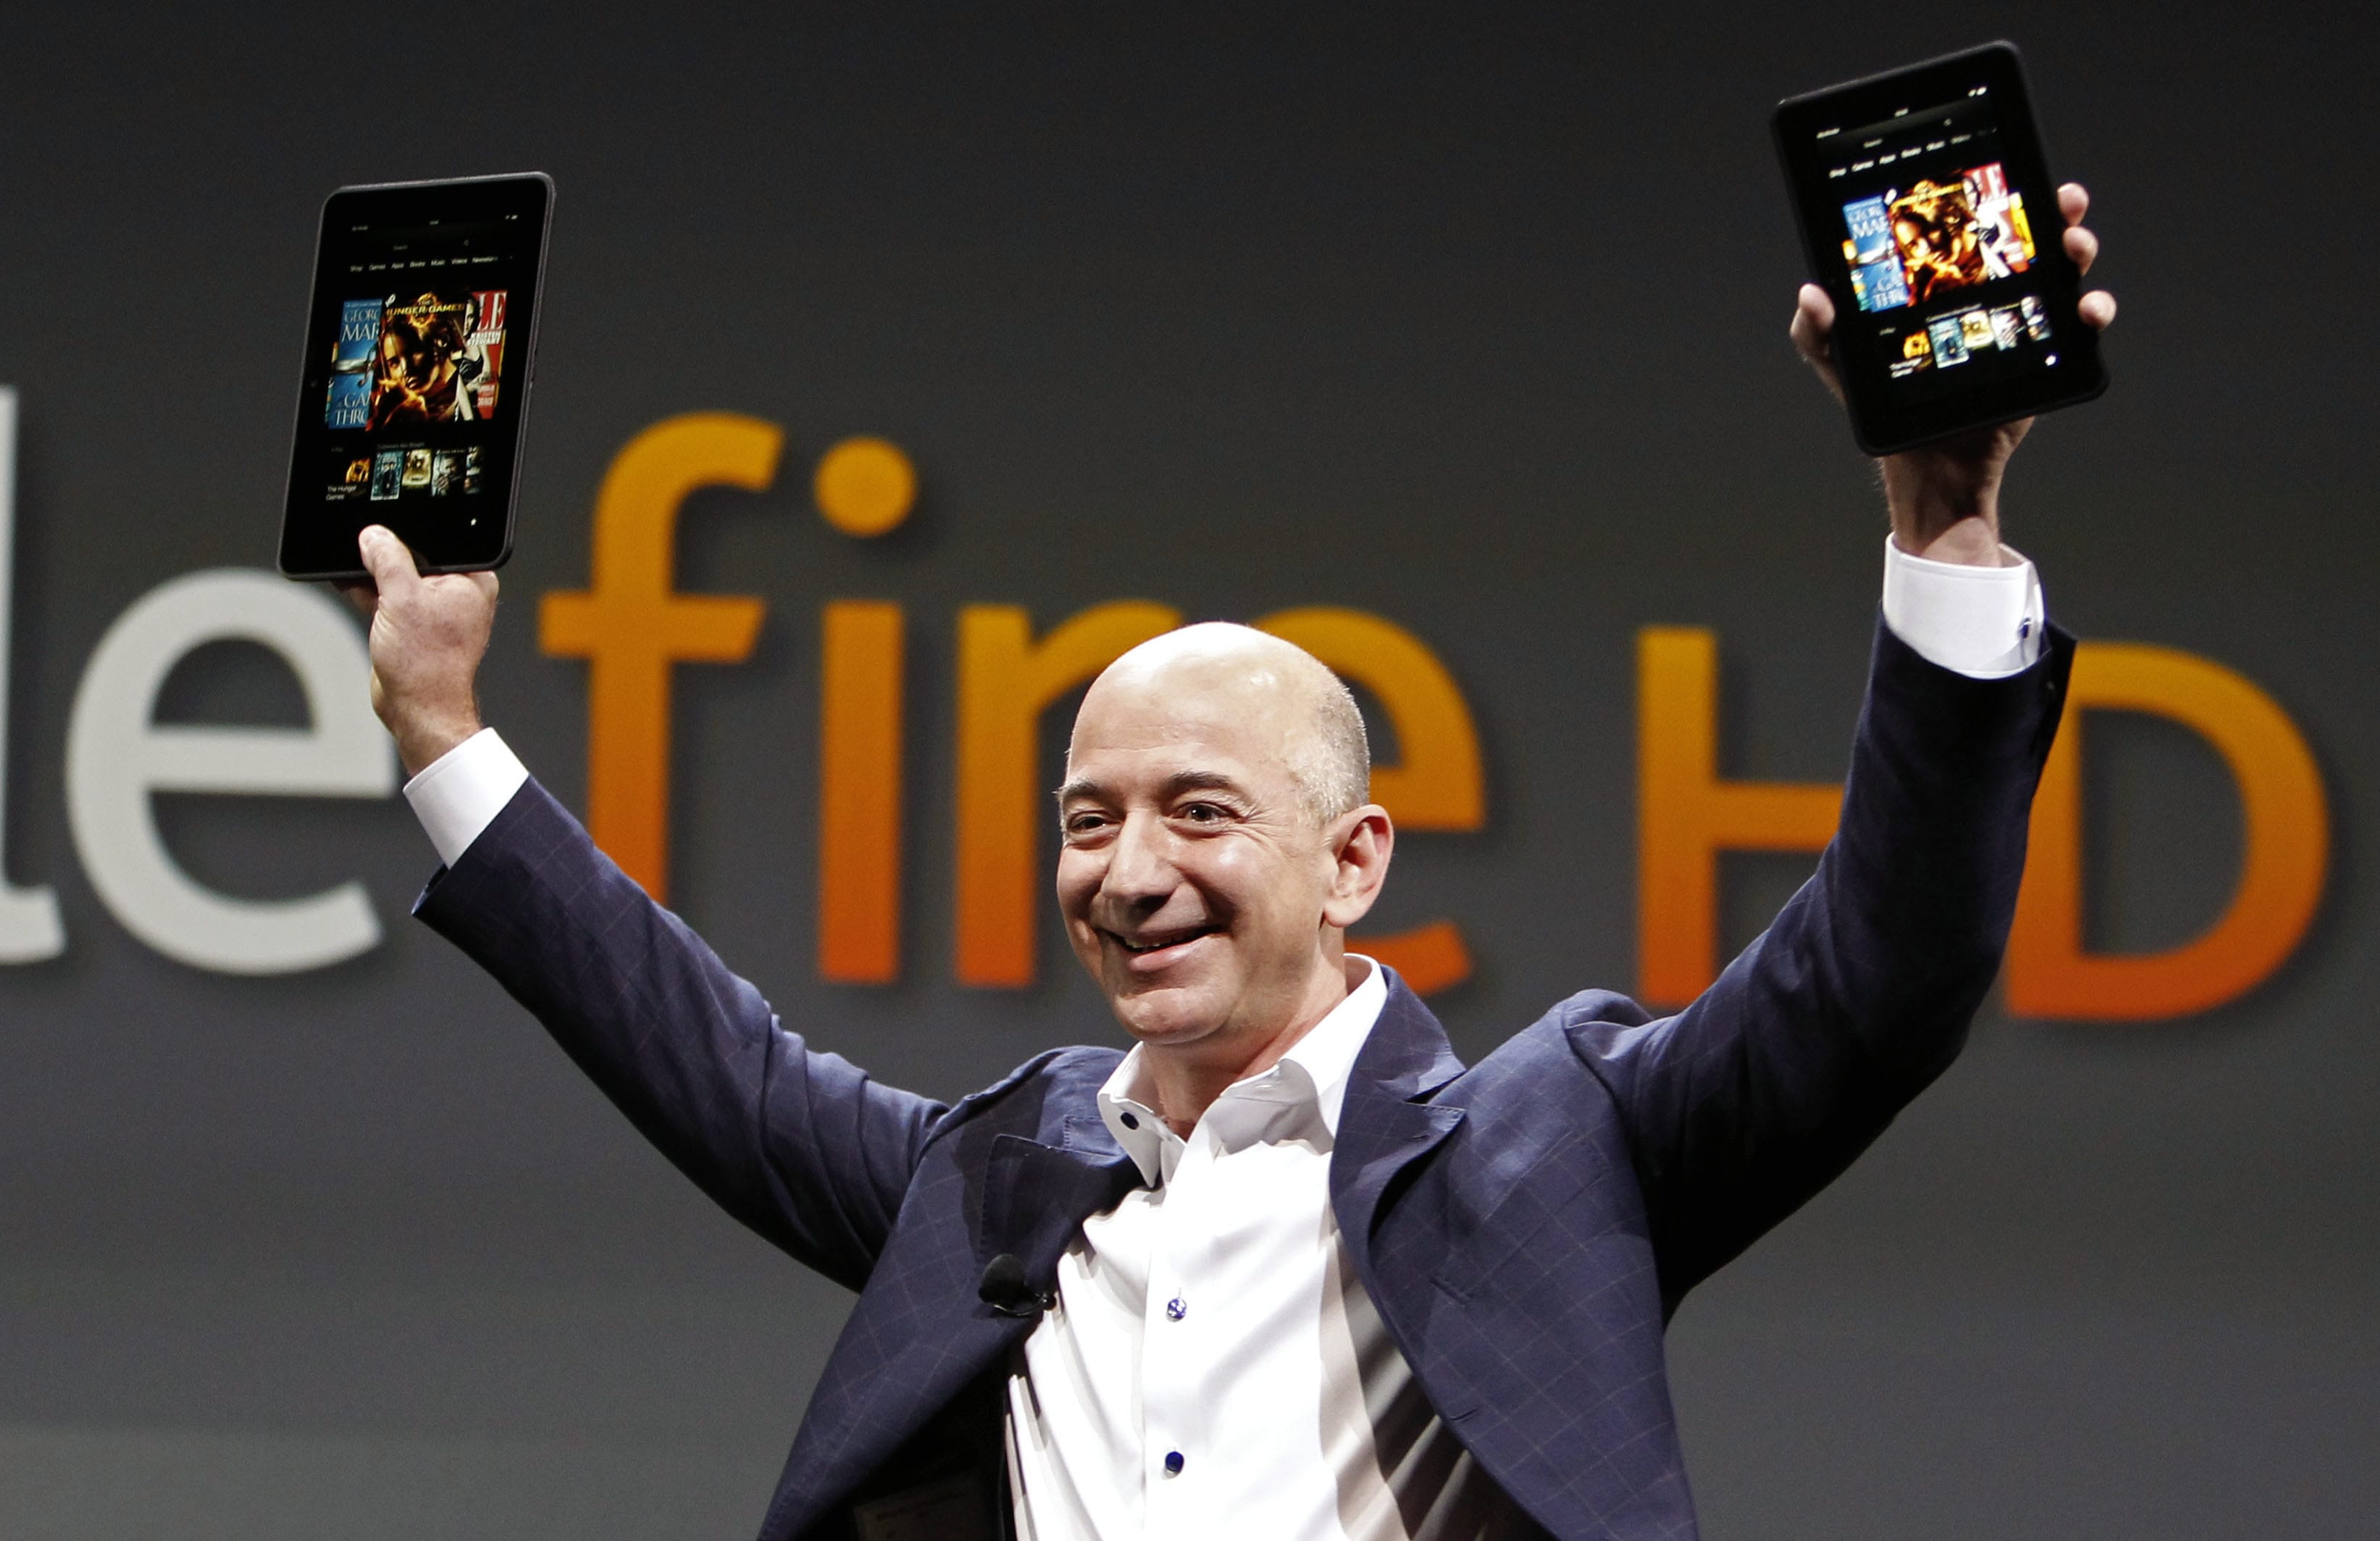 Jeff Bezos, CEO and founder of Amazon, introduces the Kindle Fire during a 2012 event in Santa Monica, Calif.